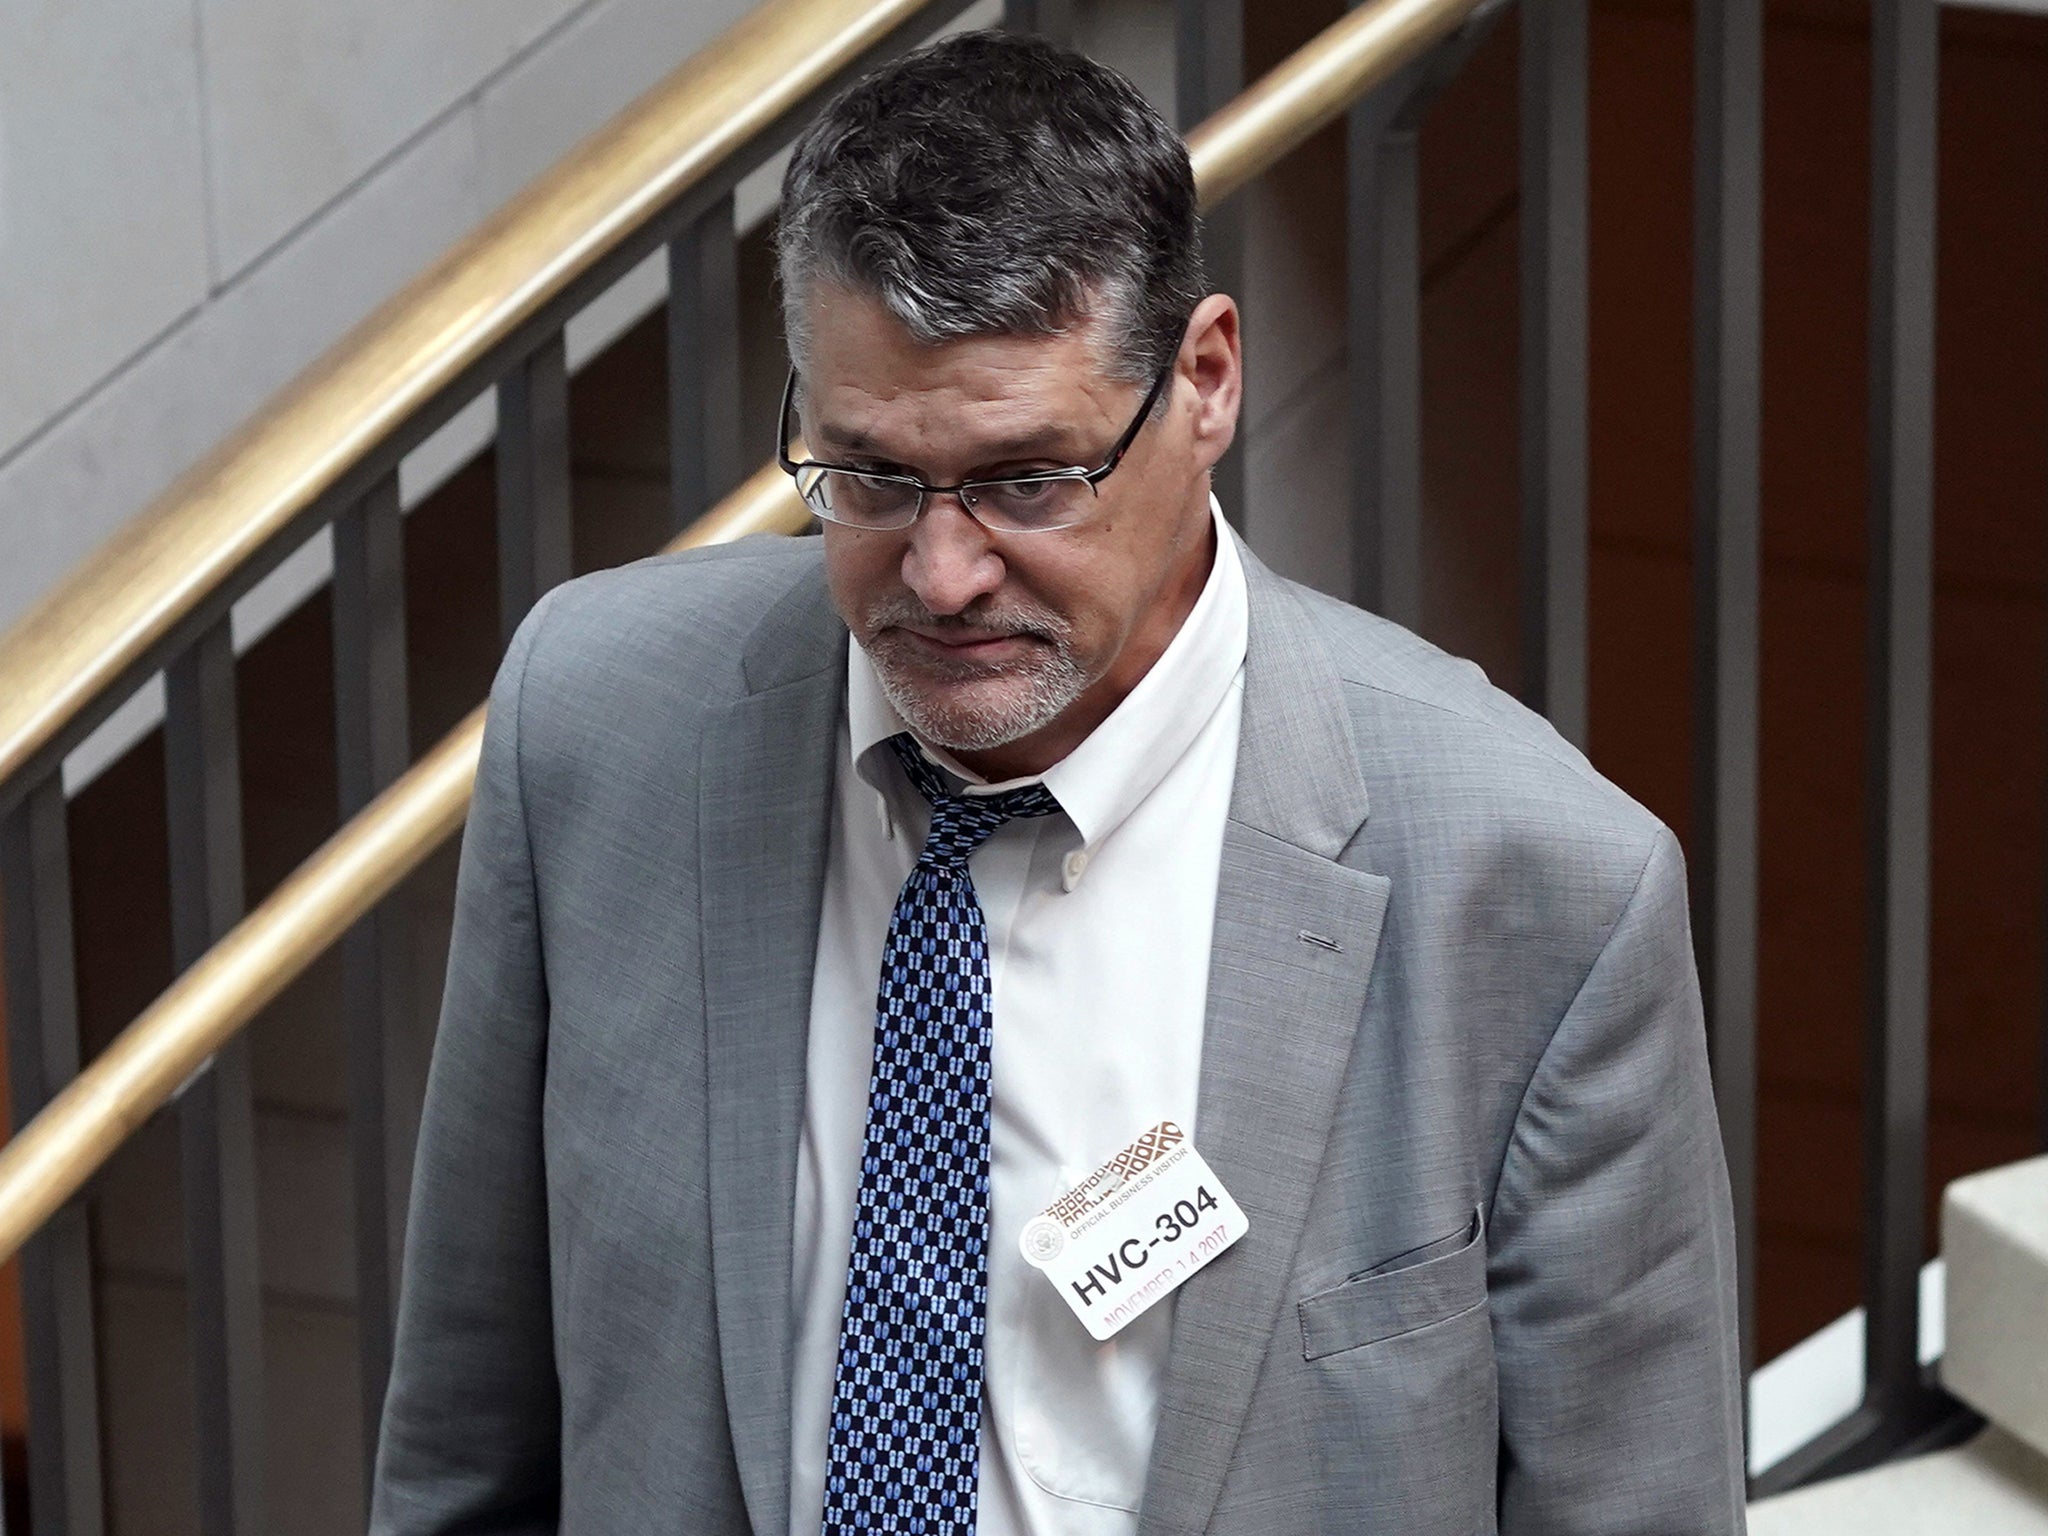 (FILE) Glenn R. Simpson, co-founder of the research firm Fusion GPS, arrives for a scheduled appearance before a closed House Intelligence Committee hearing on Capitol Hill in Washington